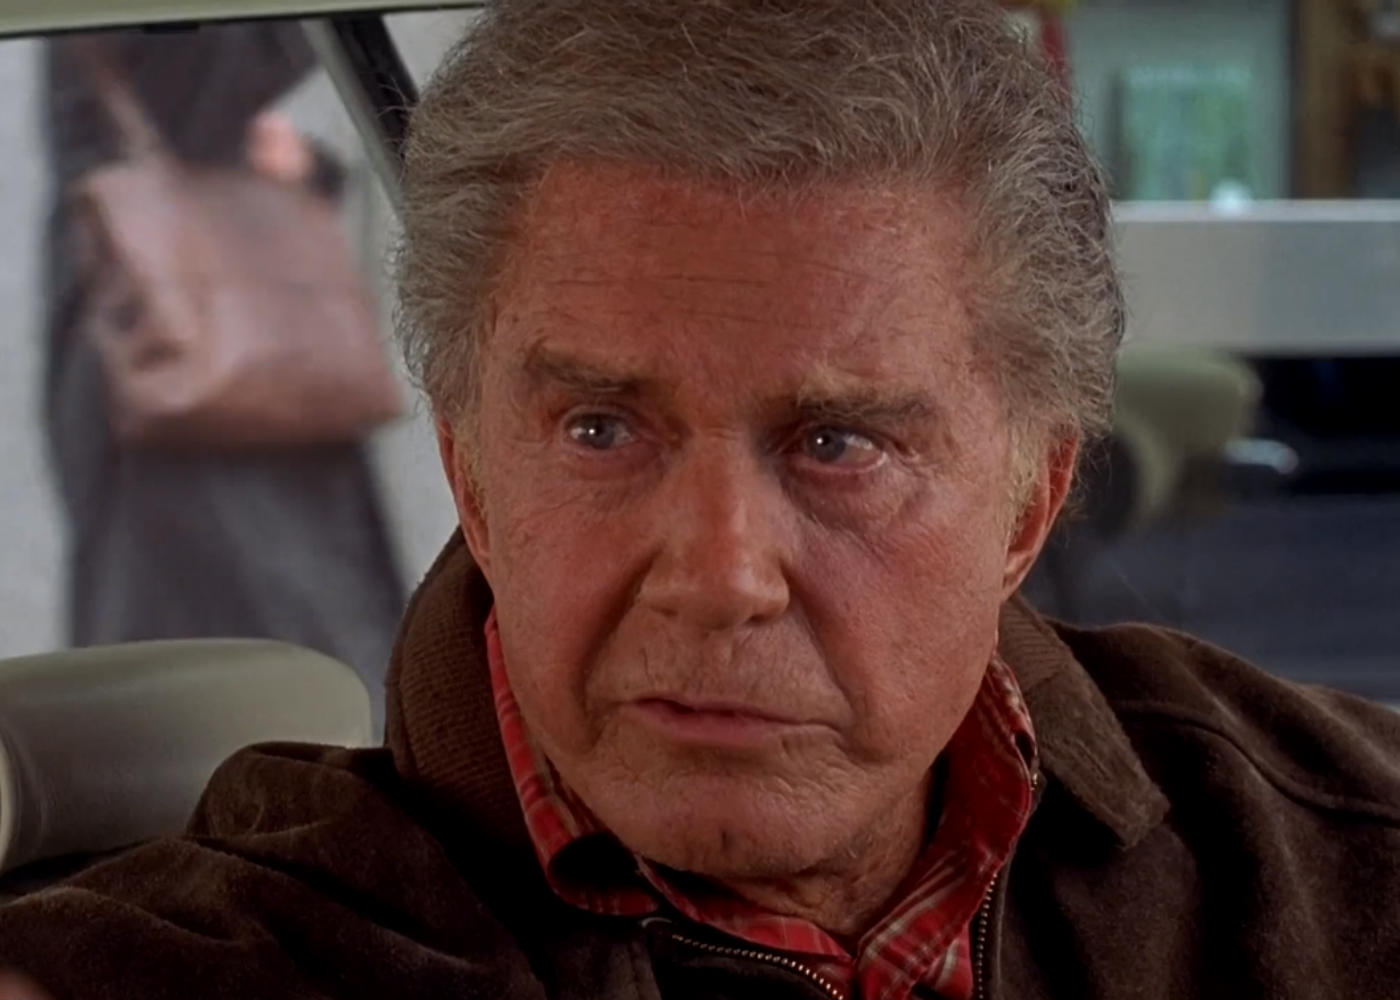 Uncle Ben sits in a car, serious.